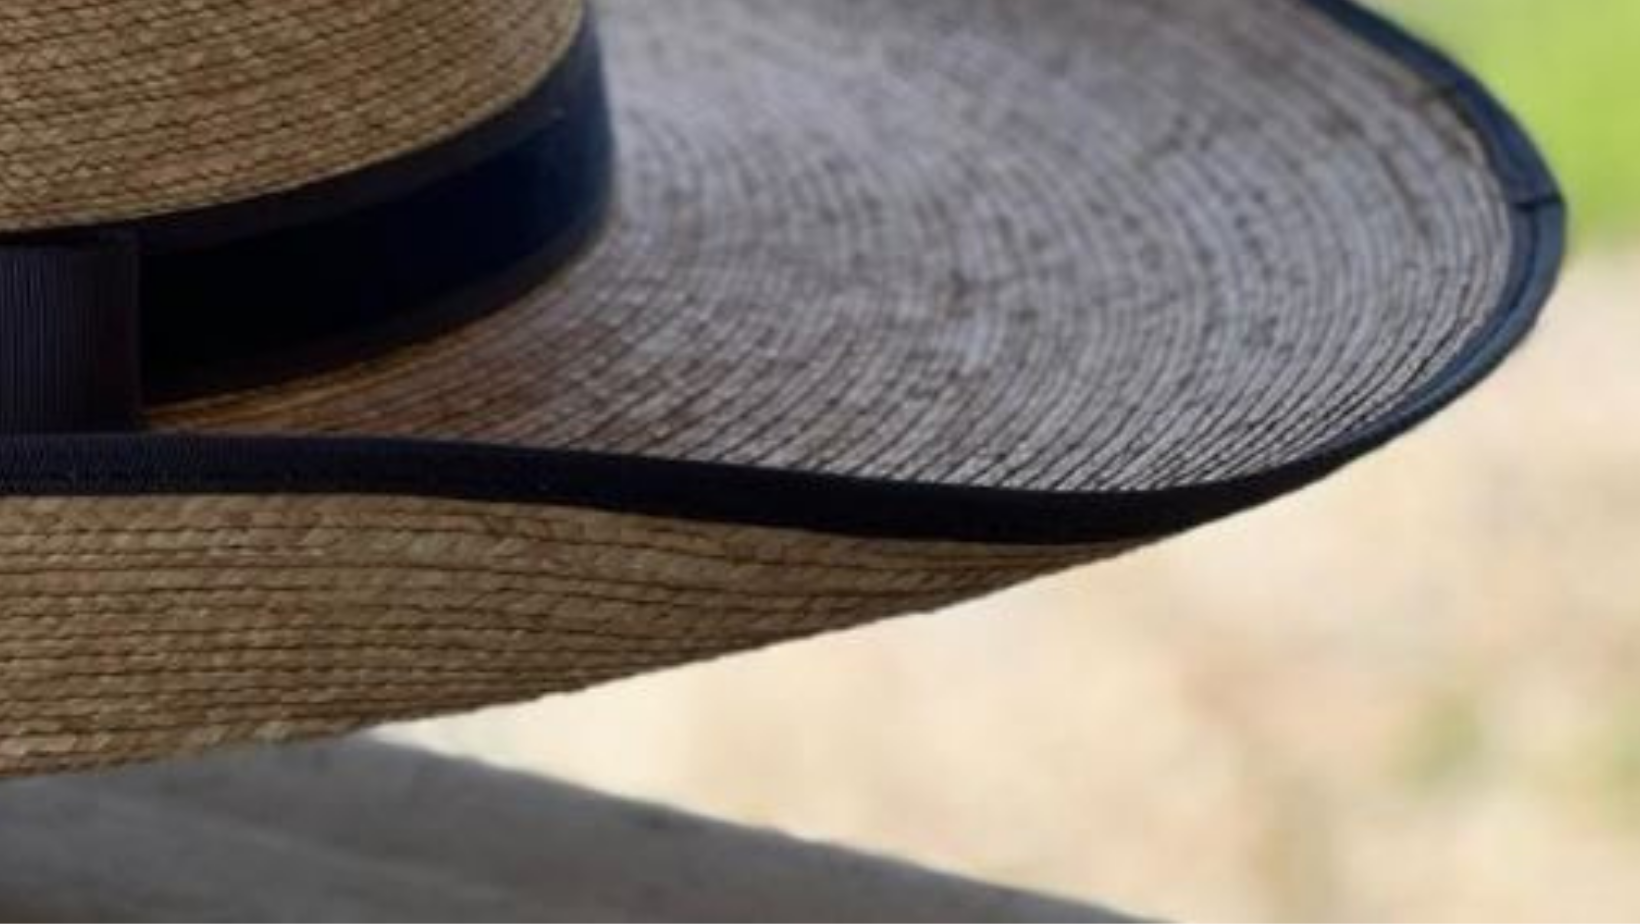 Jaxonbilt_Hats_are_Australian_made_palm_leaf_hats_and_crossbred_hats_for_cowgirls_and_cowboys_with_wide_brims_for_sun_protection_5”_brim_trim_on_edge_wide_crown_band_ribbon_bound_edge_dark_oak